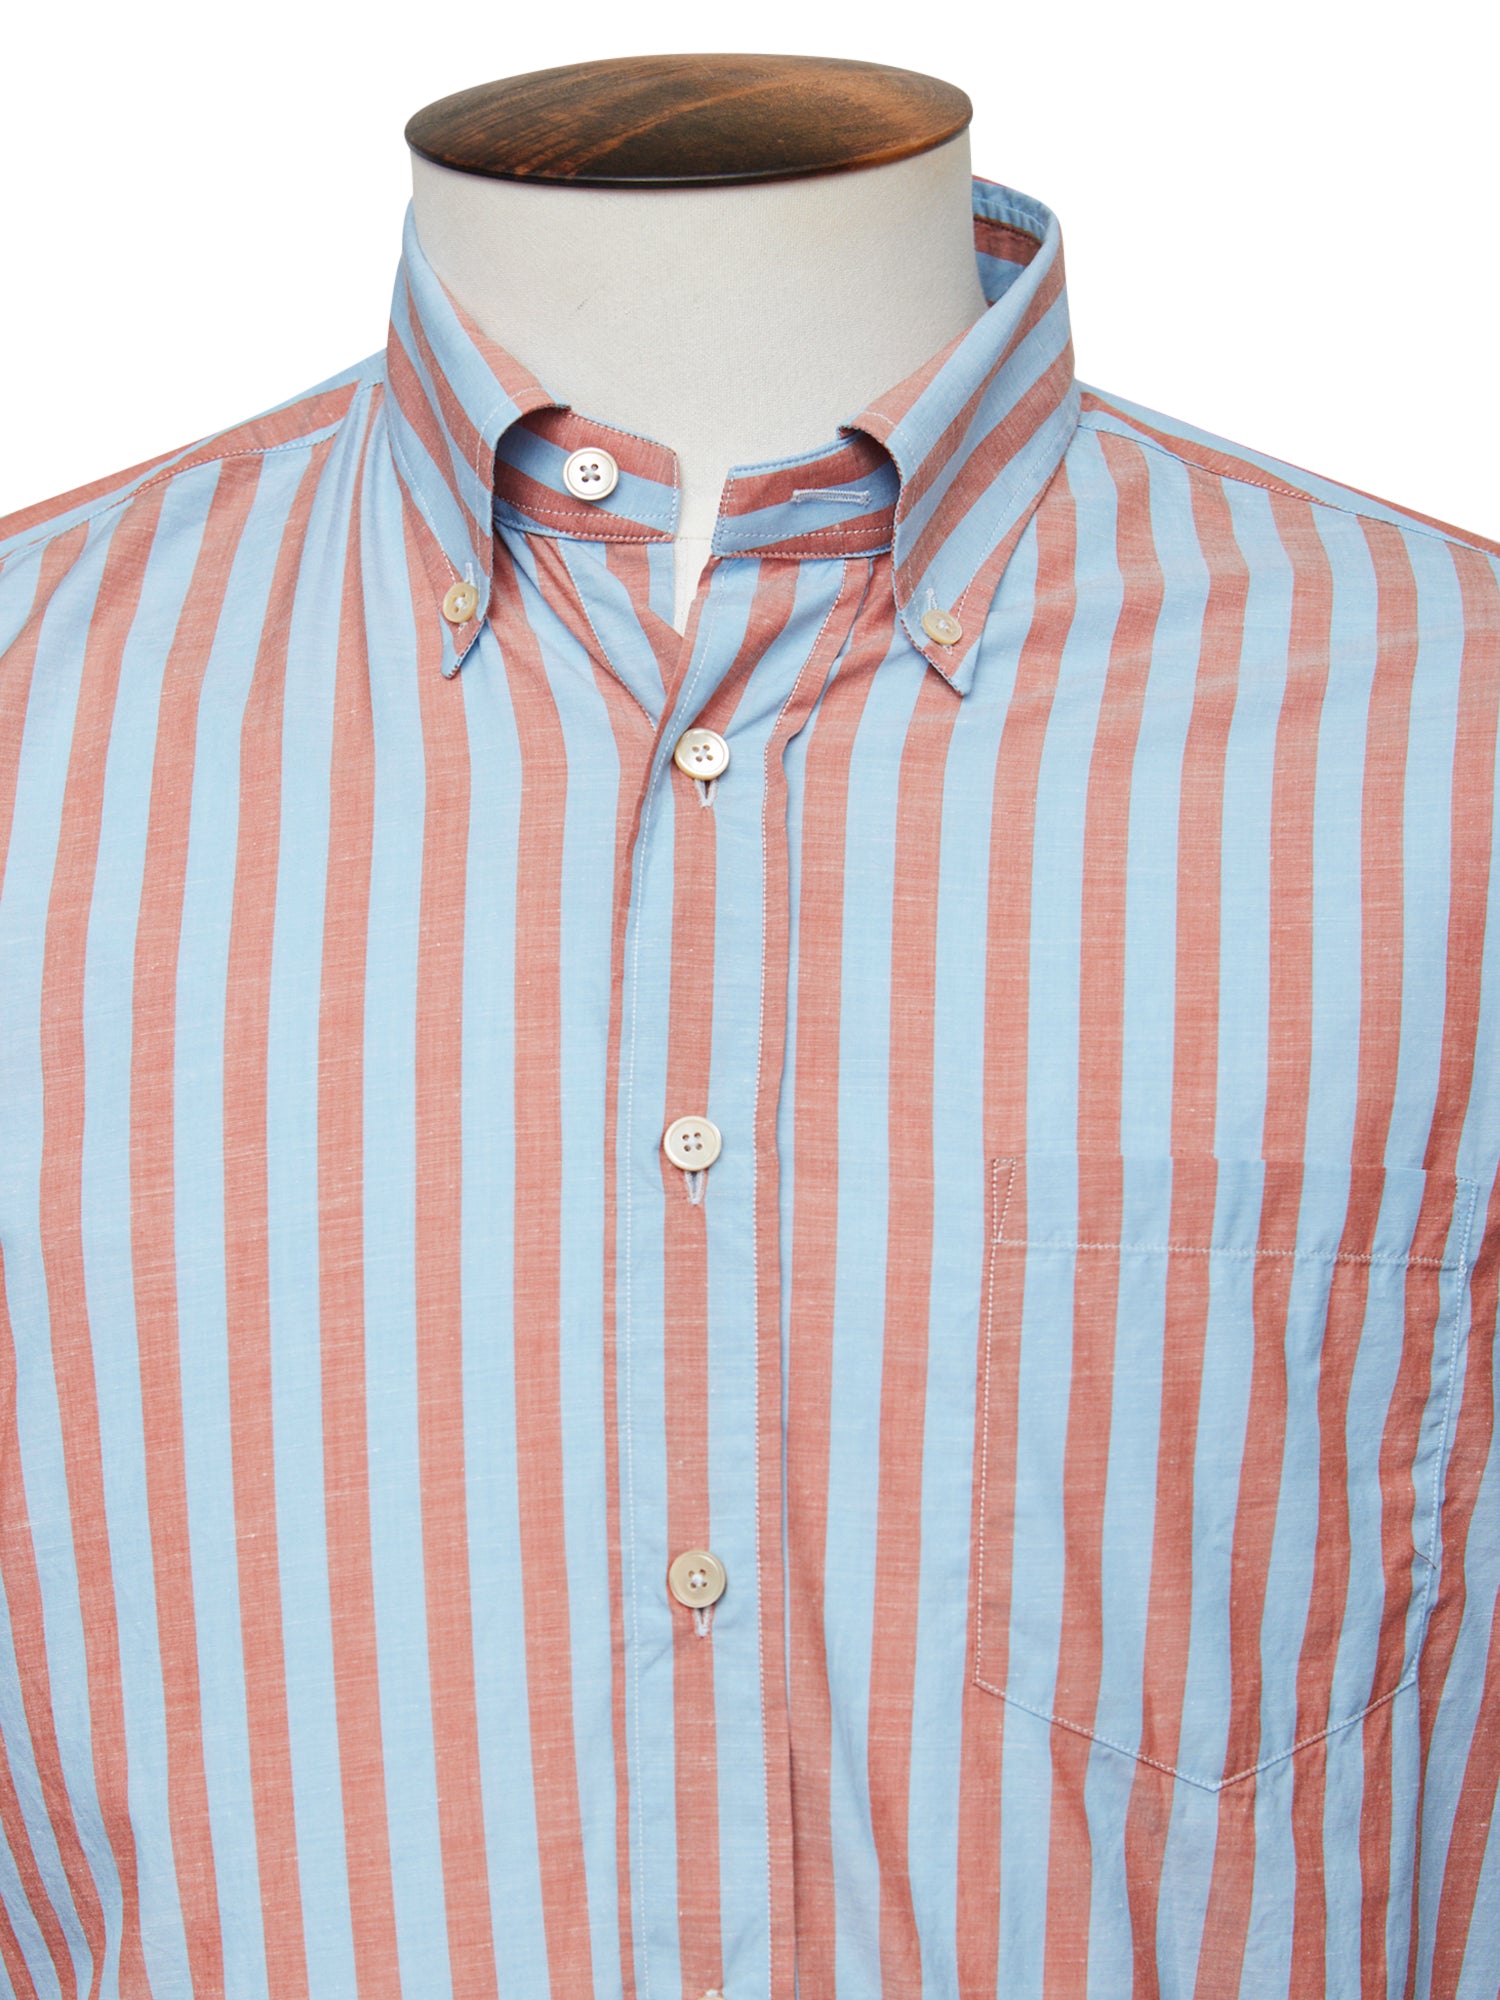 Cerulean Blue and Red Stripe Button Down Shirt